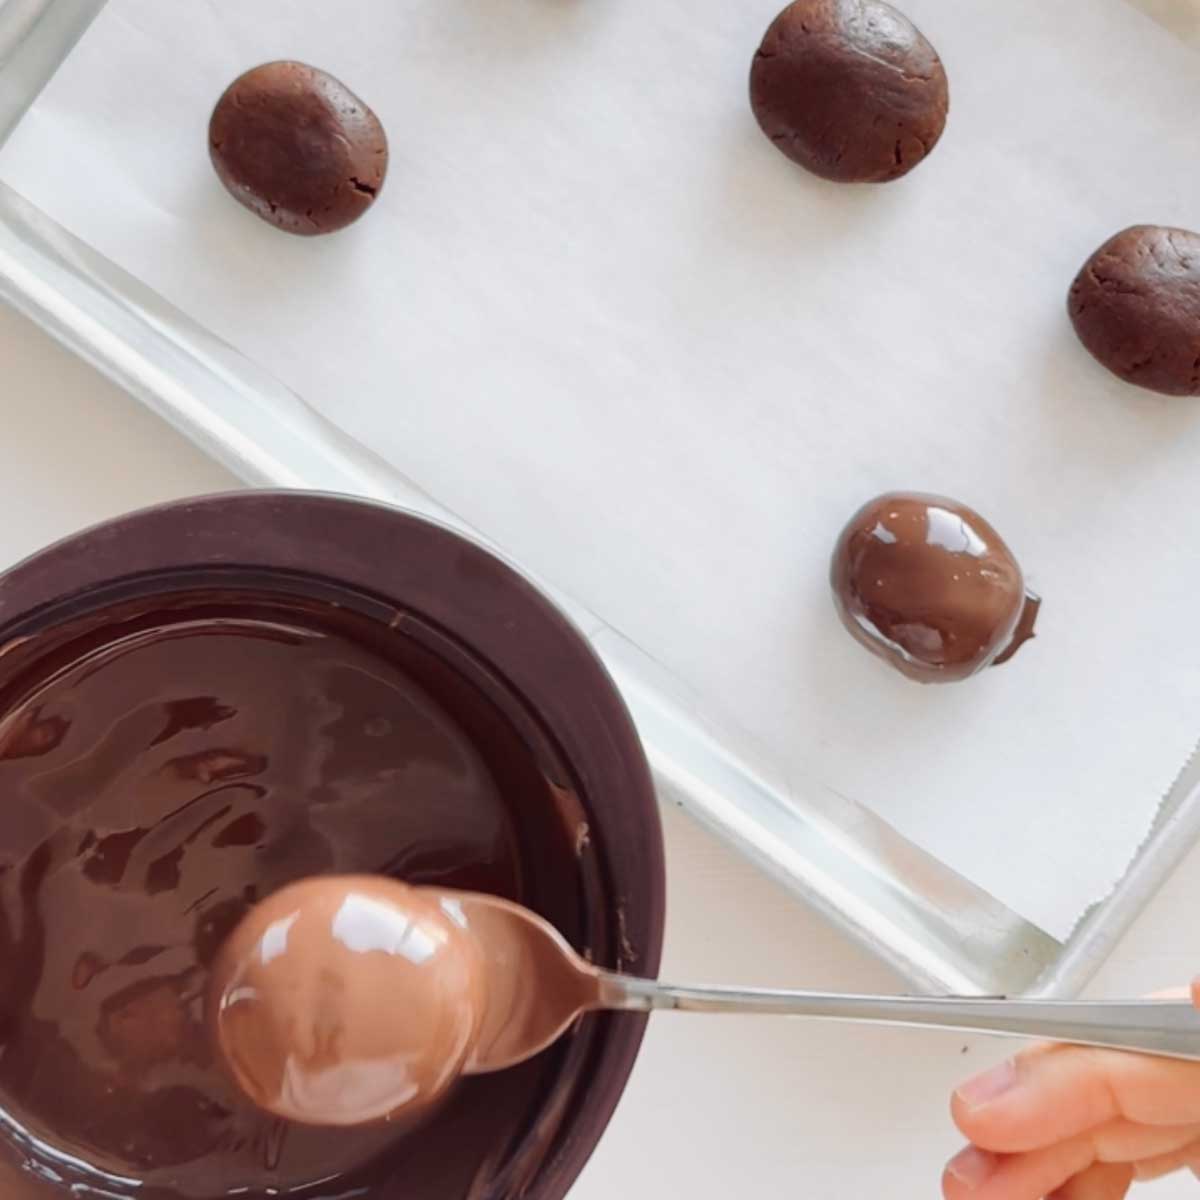 Healthier Nutella Chocolate Easter Eggs Made with PB Powder - Sweet Potatoes in the Microwave